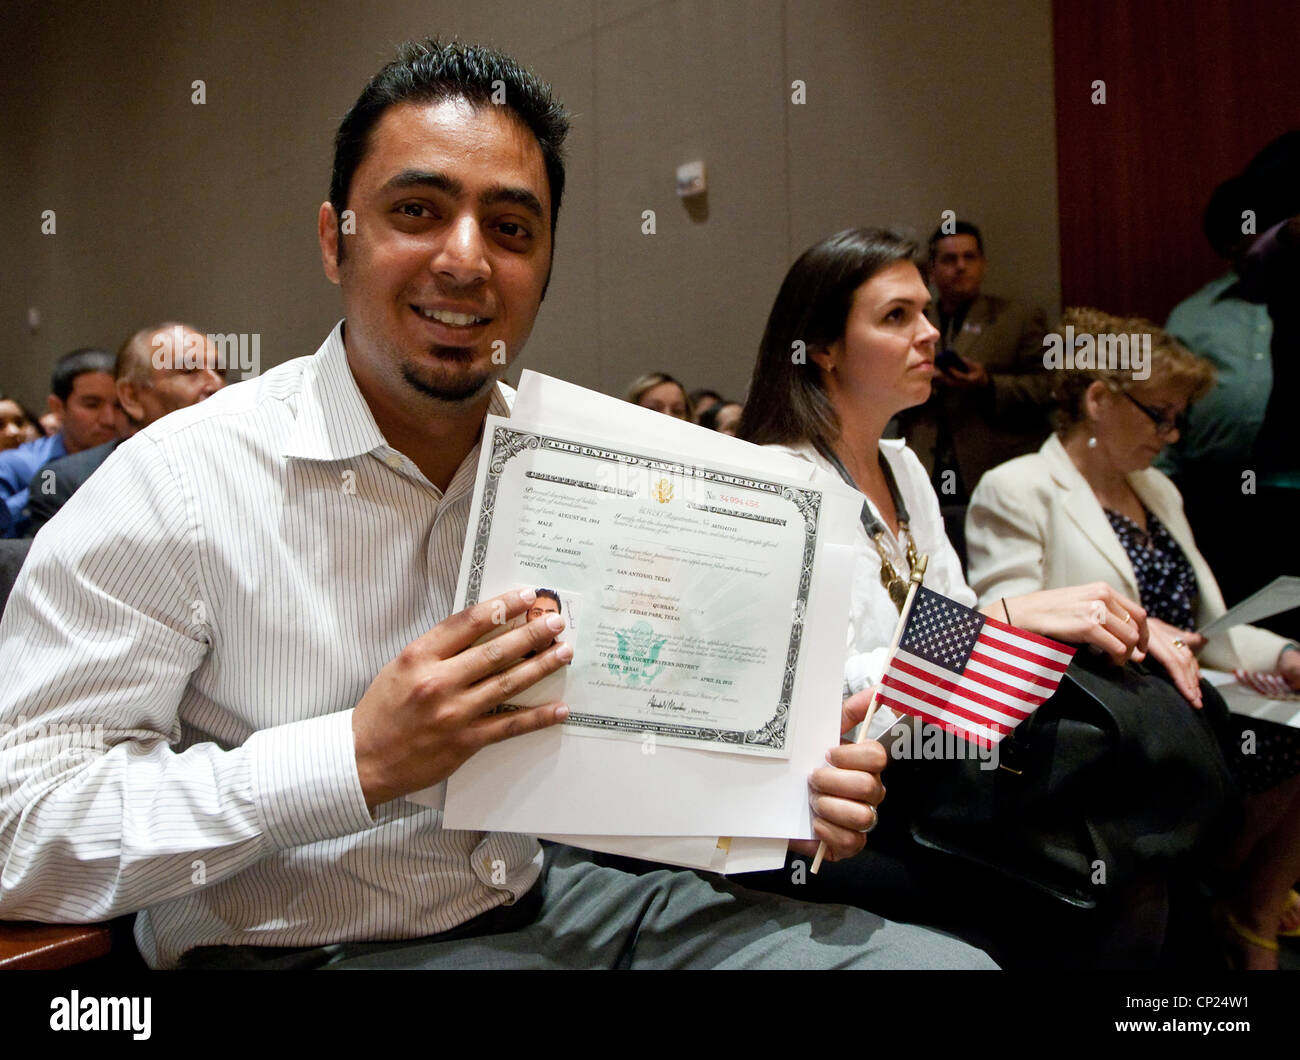 Twenty-something young man from Pakistan become U.S citizens during a naturalization ceremony held in Austin, Texas Stock Photo